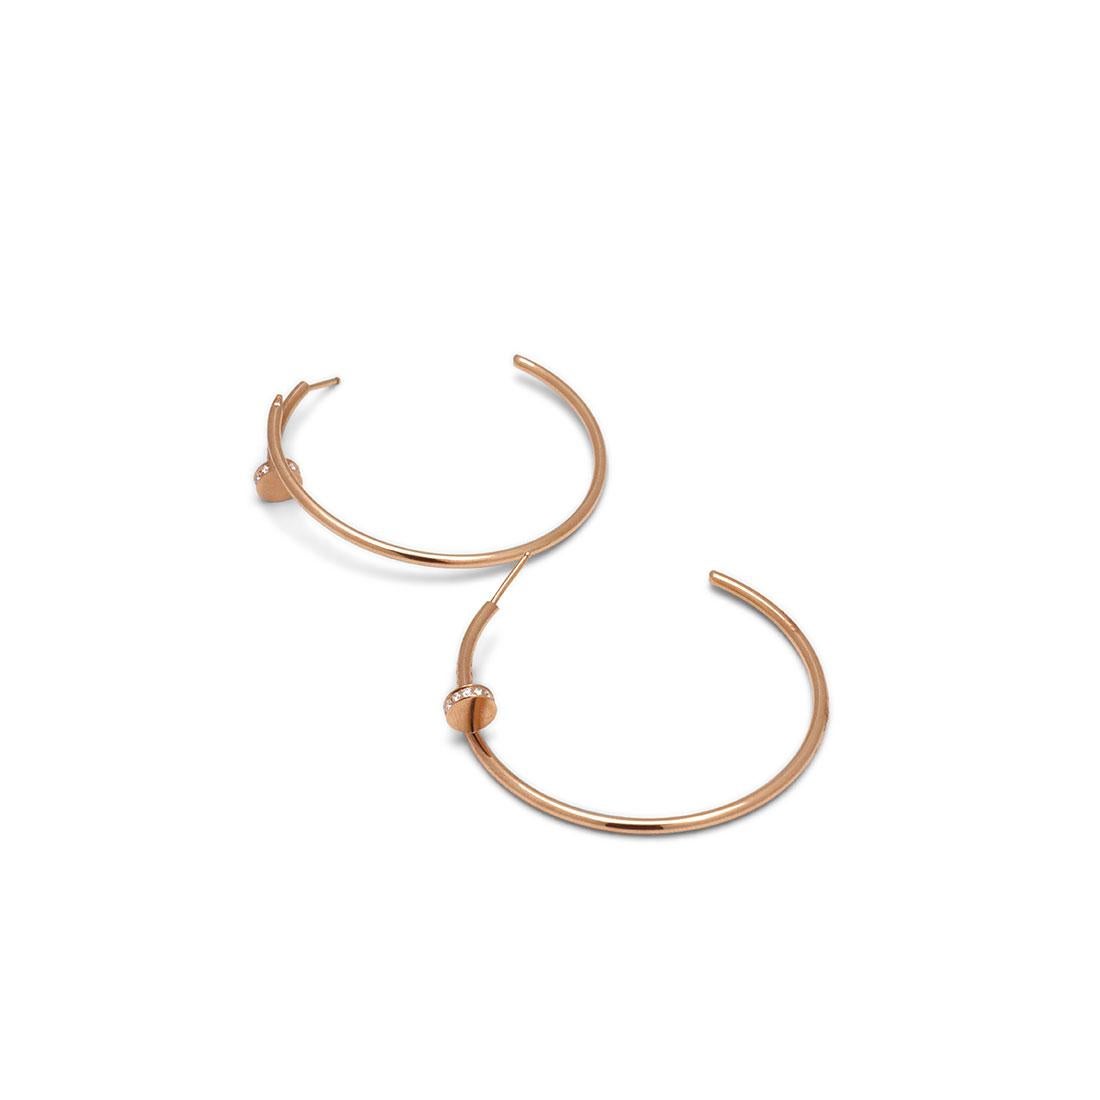 Authentic Cartier Juste Un Clou earrings crafted in 18 karat rose gold features the iconic Cartier nail motif taking the shape of hoop earrings. The earrings are set with 28 round brilliant cut diamonds for an estimated 0.17 total carat weight.